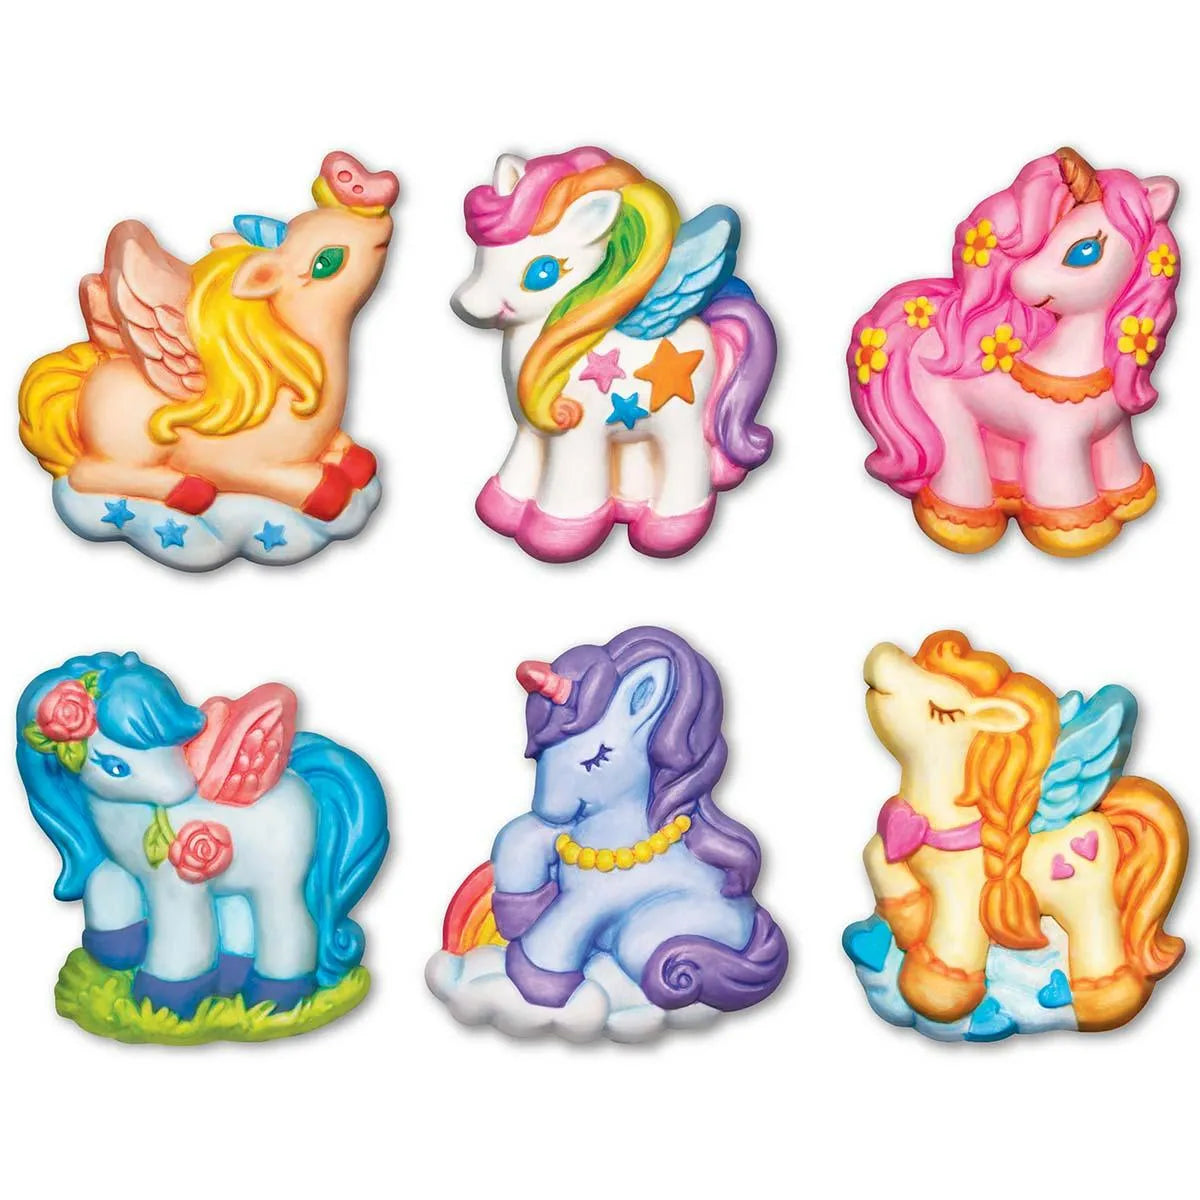 shop craft set for children at The Toy Room - great gizmos unicorn set - mould and paint set